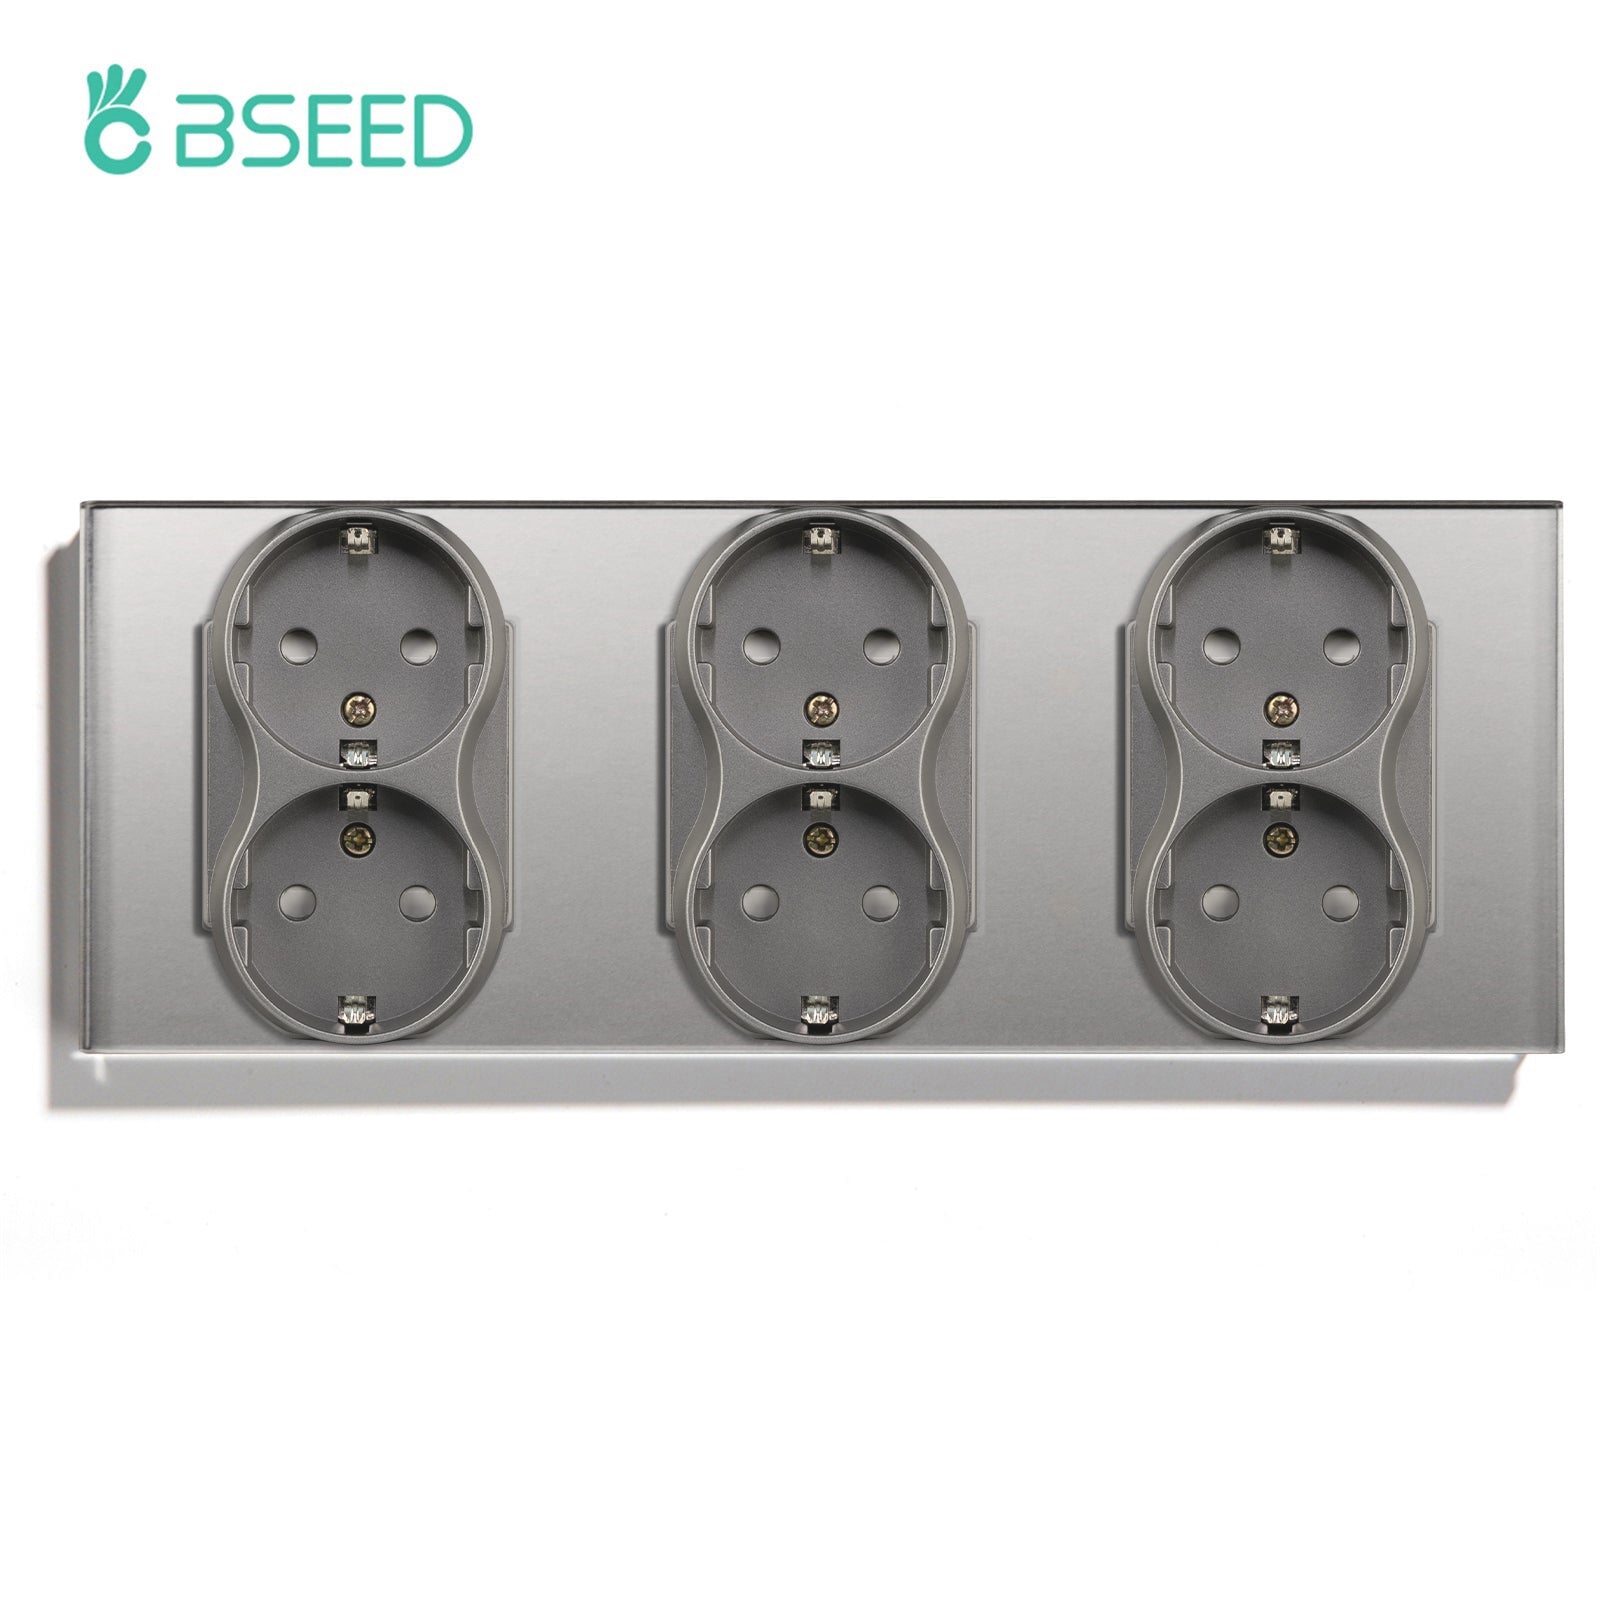 BSEED EU Double Sockets Power Wall Outlet Home Wall Power Sockets Glass Panel Power Outlets & Sockets Bseedswitch Grey Triple 